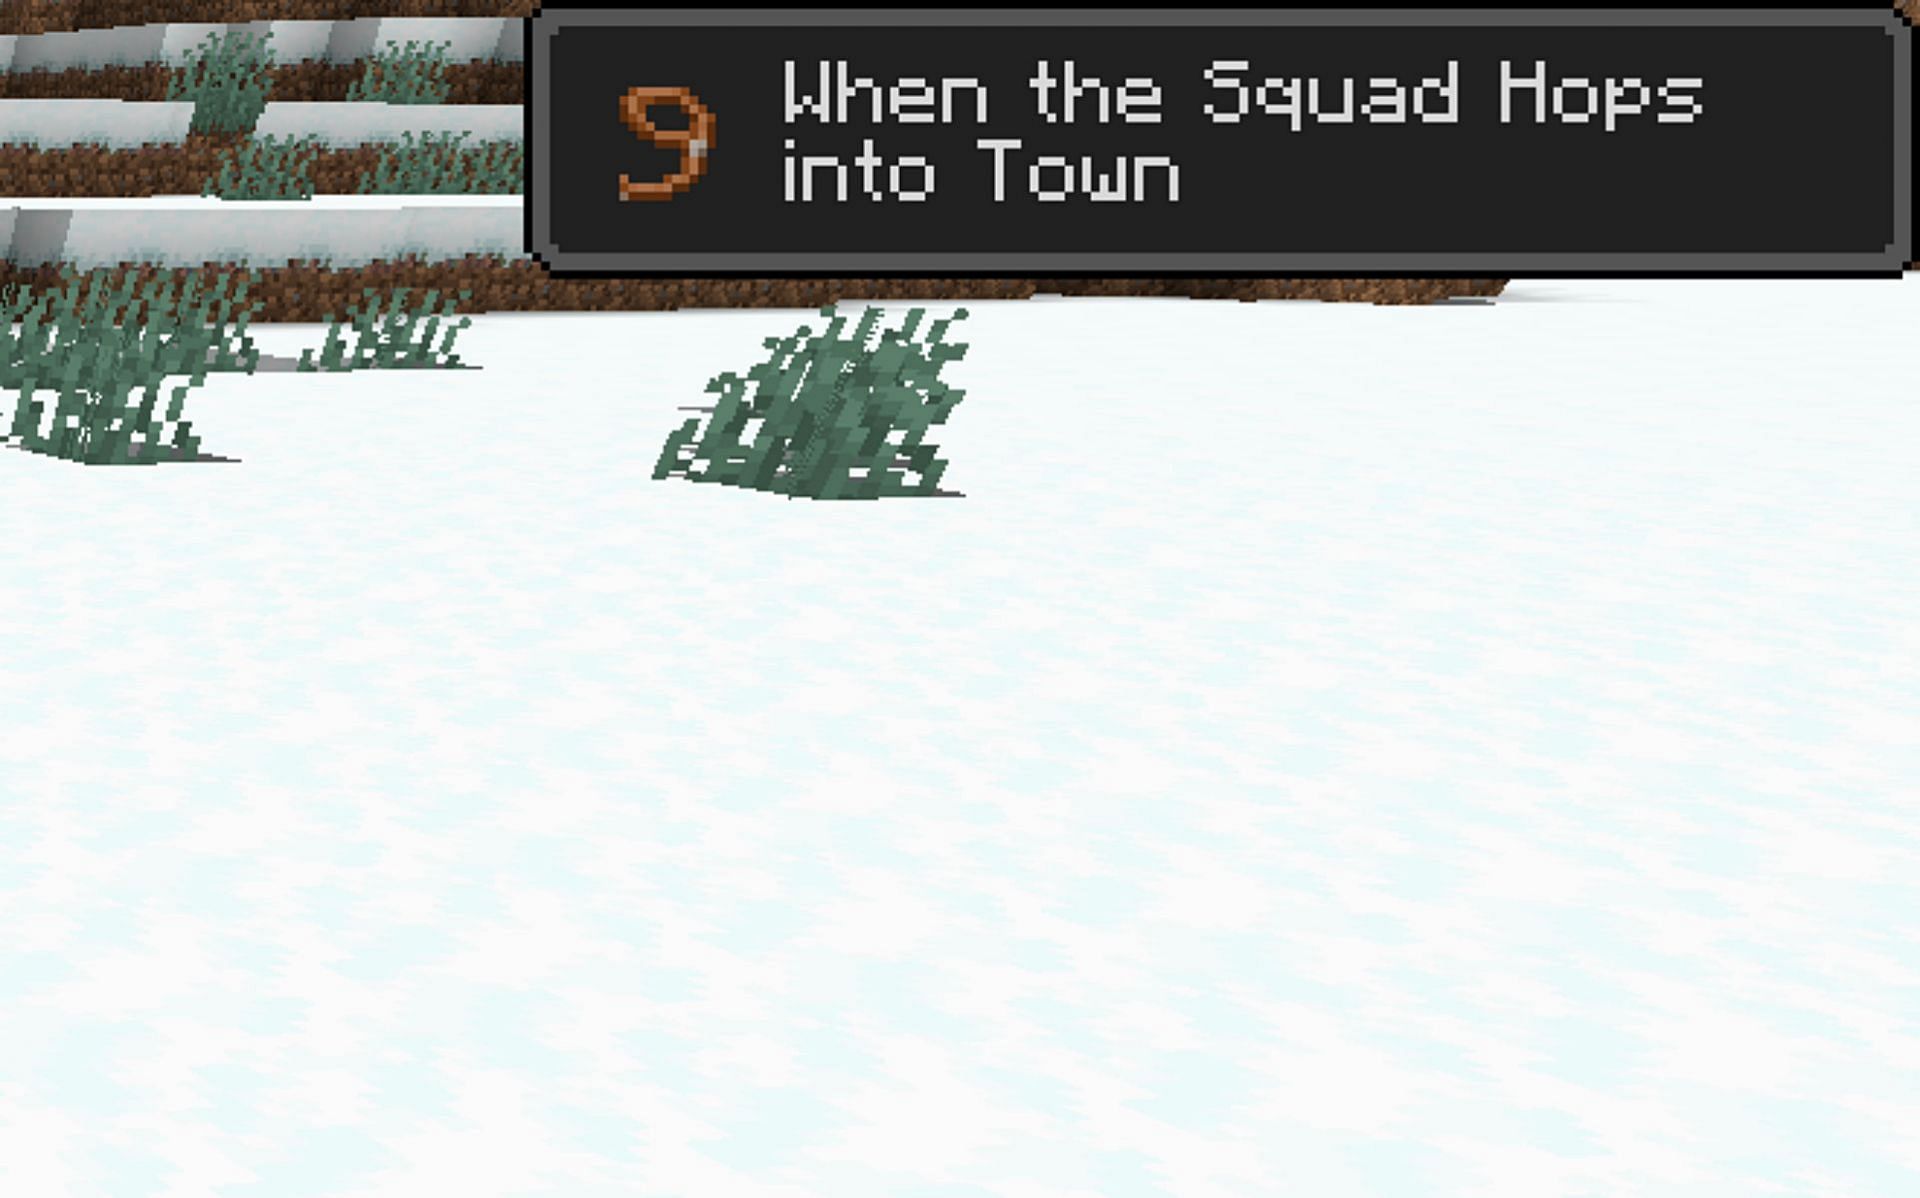 This is a brand new advancement related to frogs (Image via Minecraft)